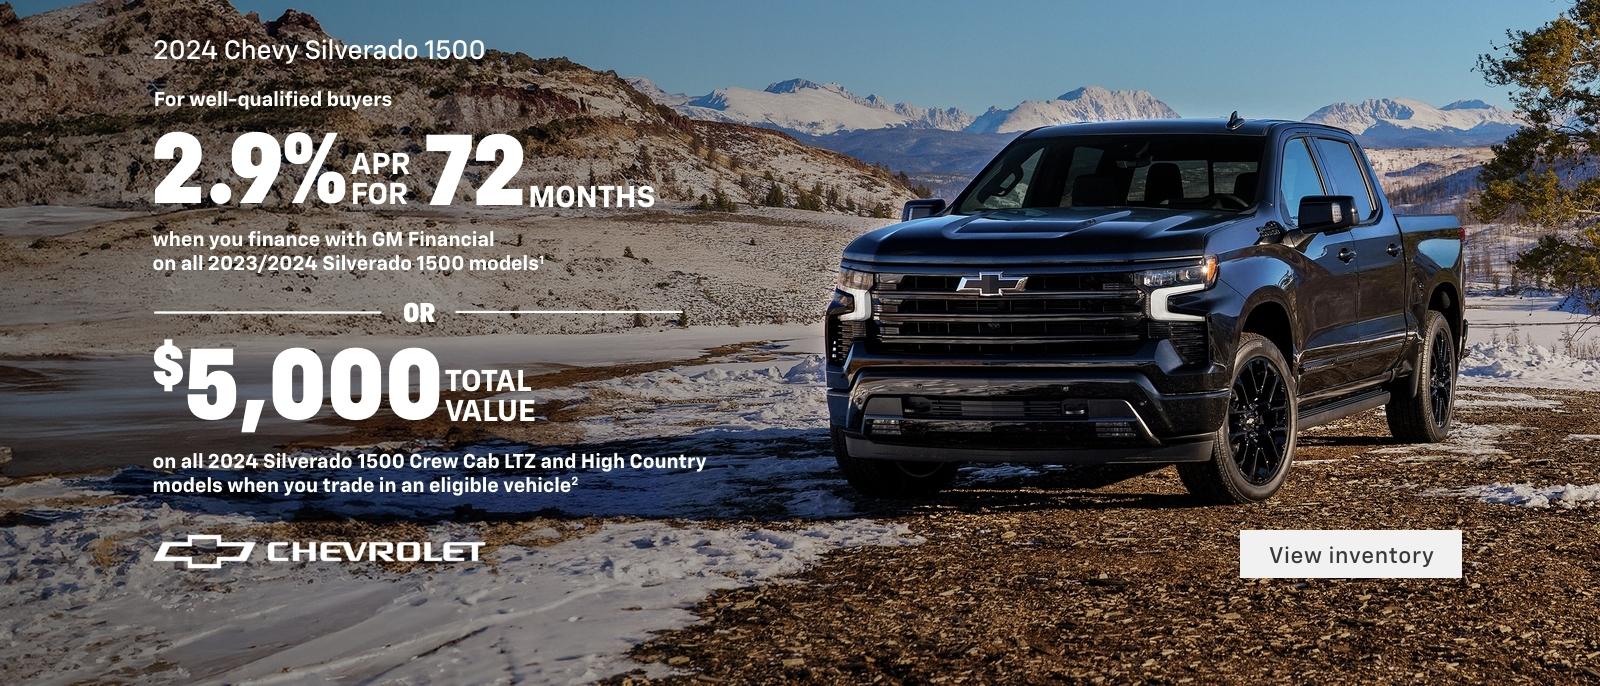 2024 Silverado 1500. For well-qualified buyers 2.9% APR for 72 months when you finance with GM Financial on all 2024 Silverado 1500 models. Or, $5,000 total value on all 2024 Silverado 1500 Crew Cab LTZ & High Country models when you trade in an eligible vehicle.